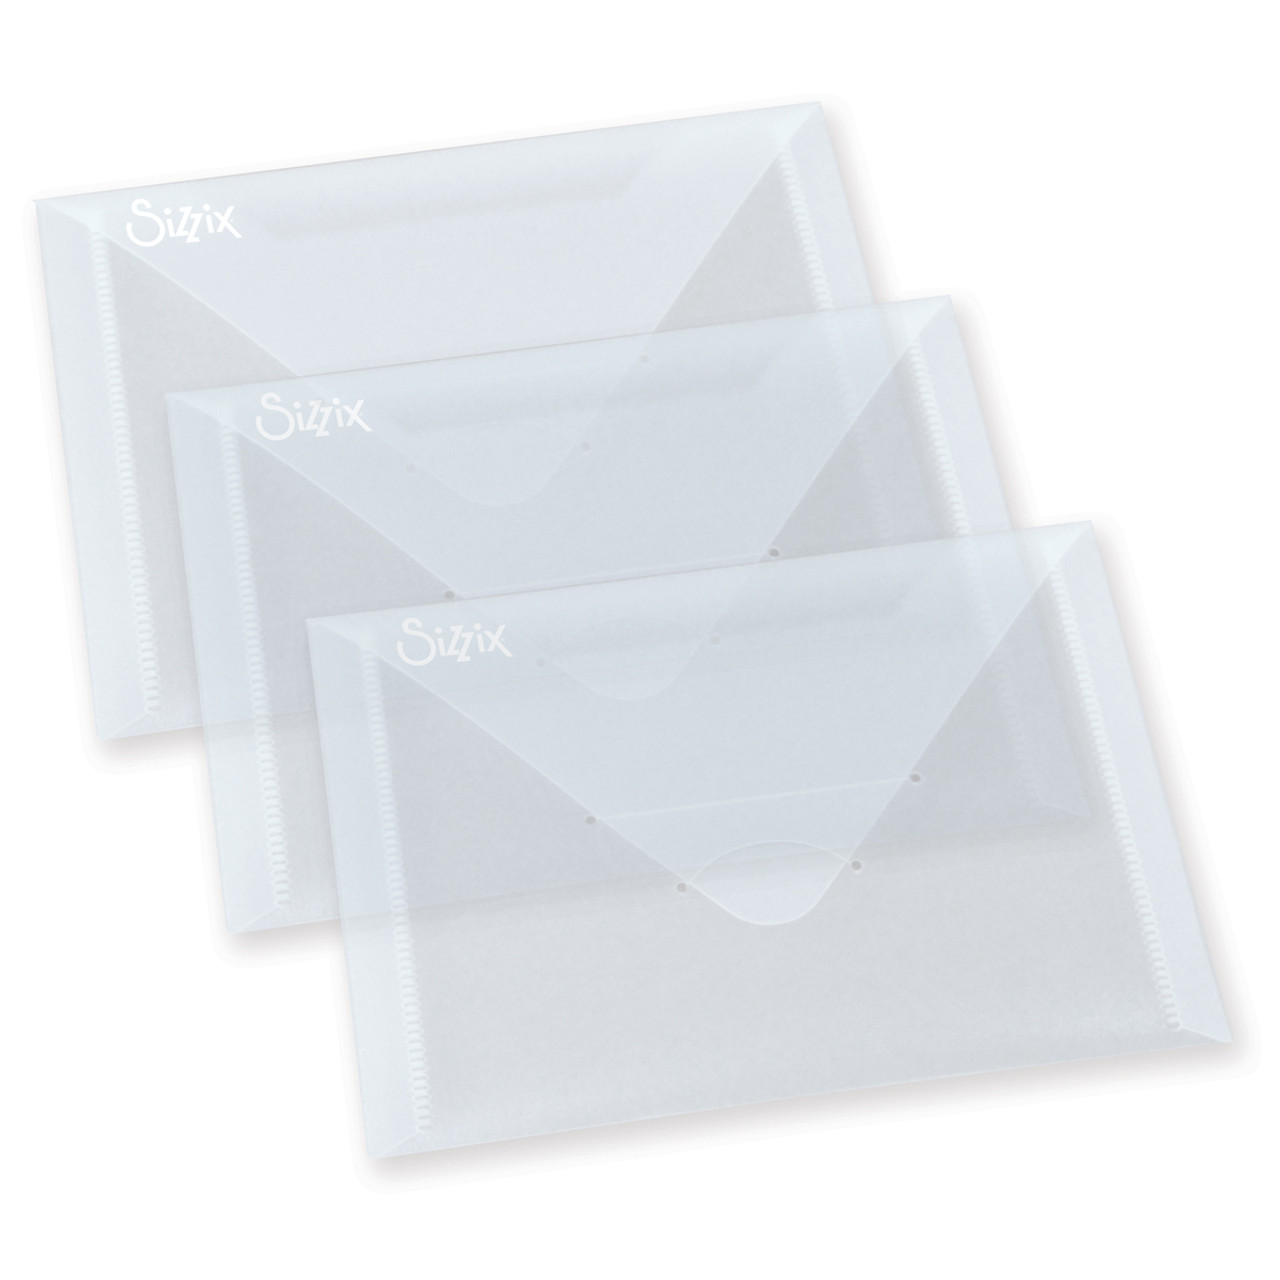 2 Pack Sizzix Magnetic Sheets 4.375X6.5 3/Pkg665680 - GettyCrafts